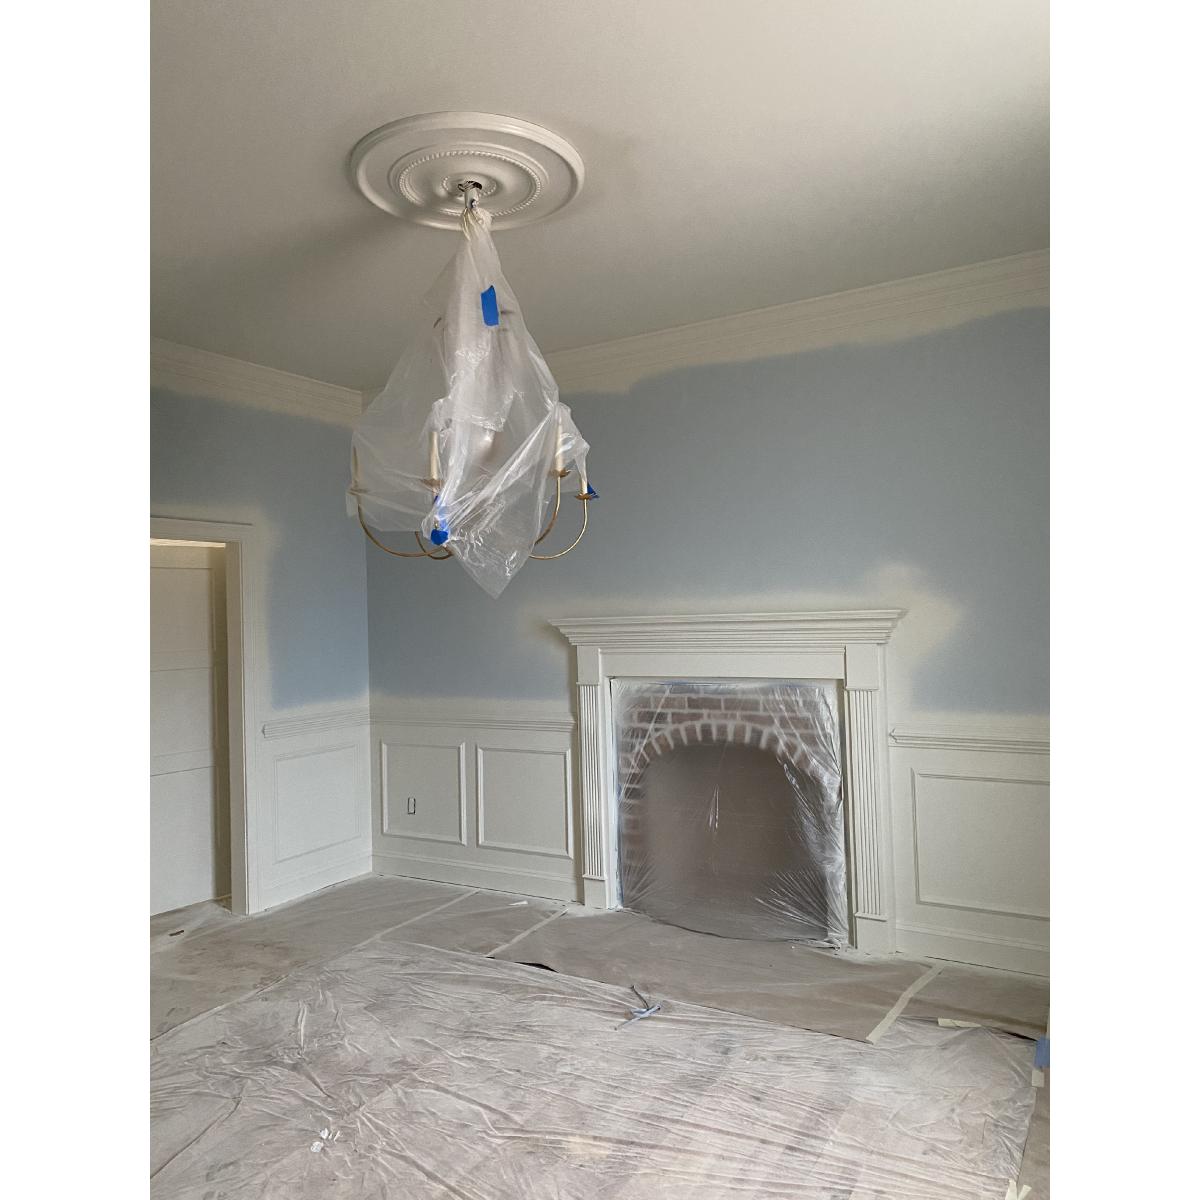 30-Inch OD x 2 1/4-Inch P Dylar Ceiling Medallion (Fits Canopies up to 6  1/4-Inch )